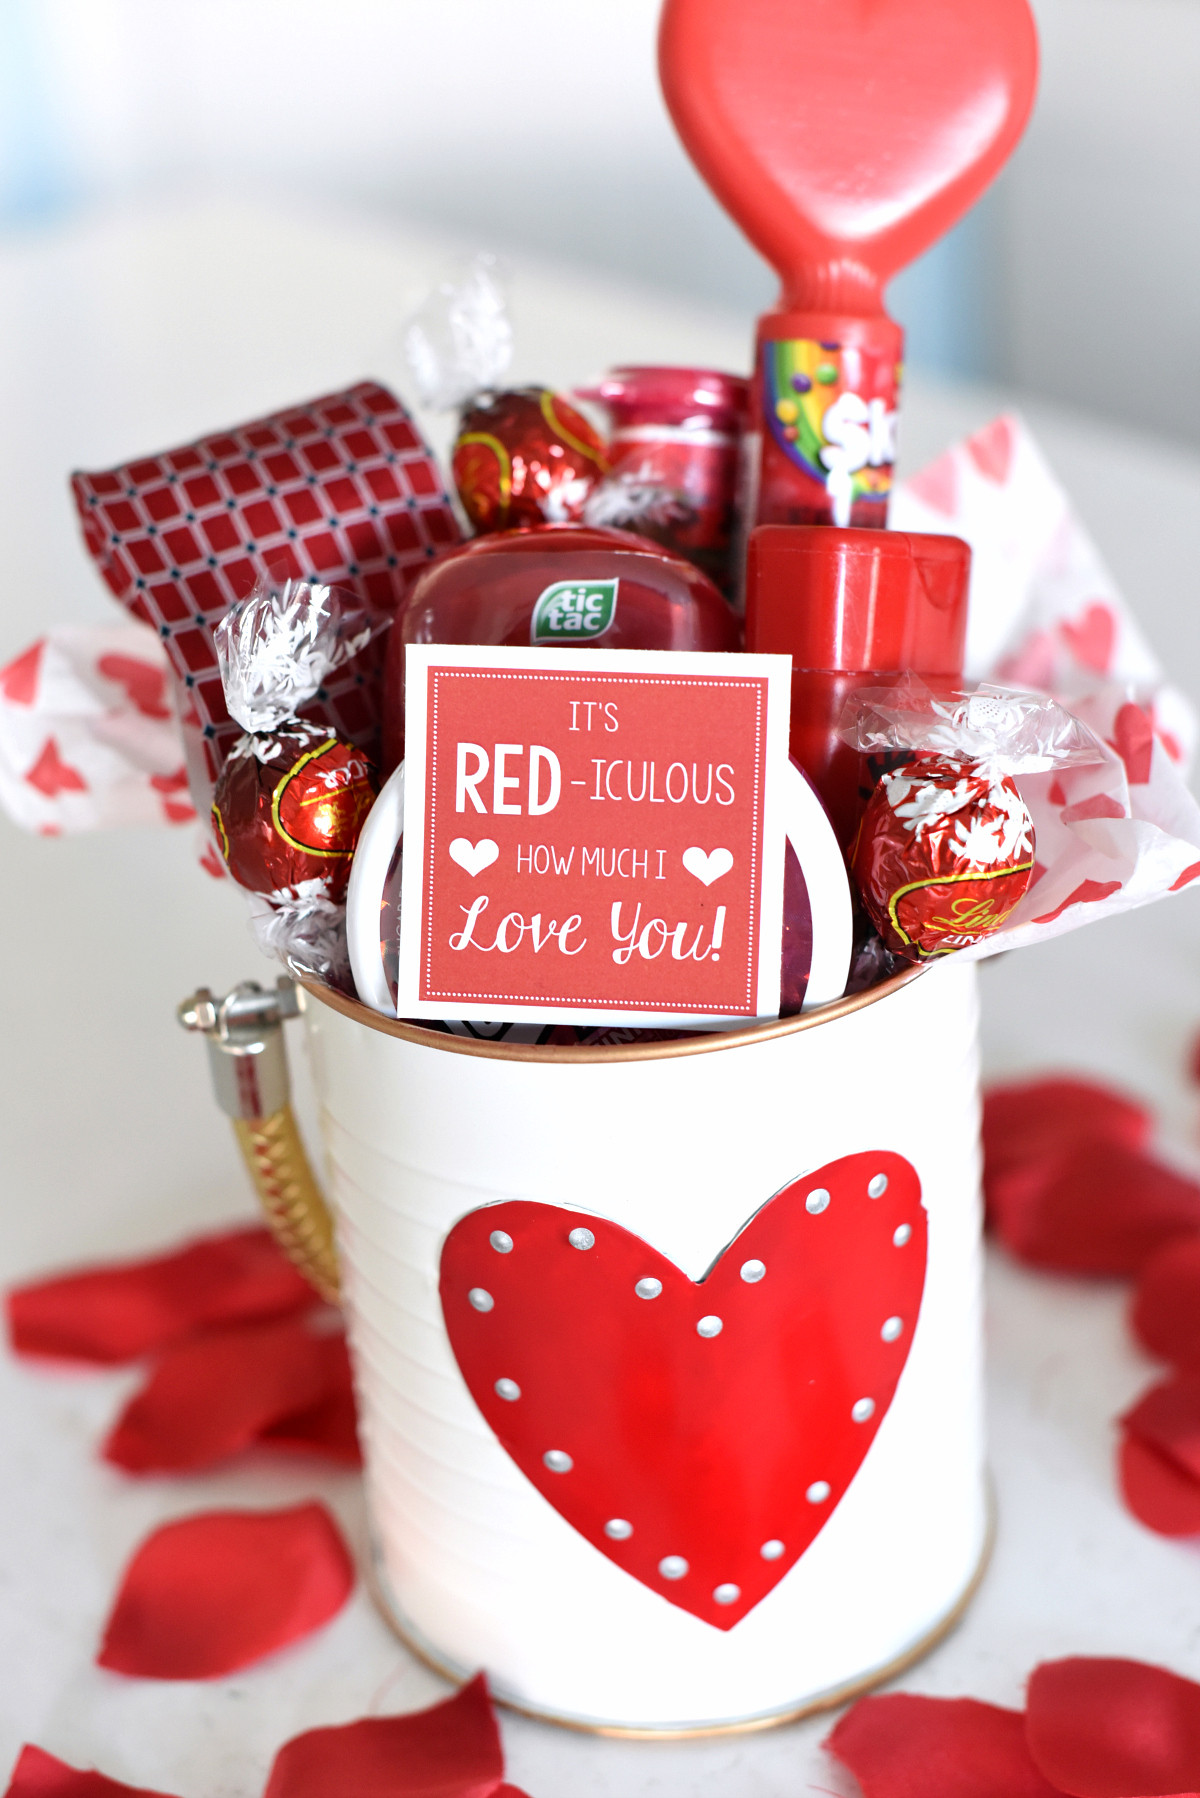 Gift Ideas For Valentines Day
 25 DIY Valentine s Day Gift Ideas Teens Will Love